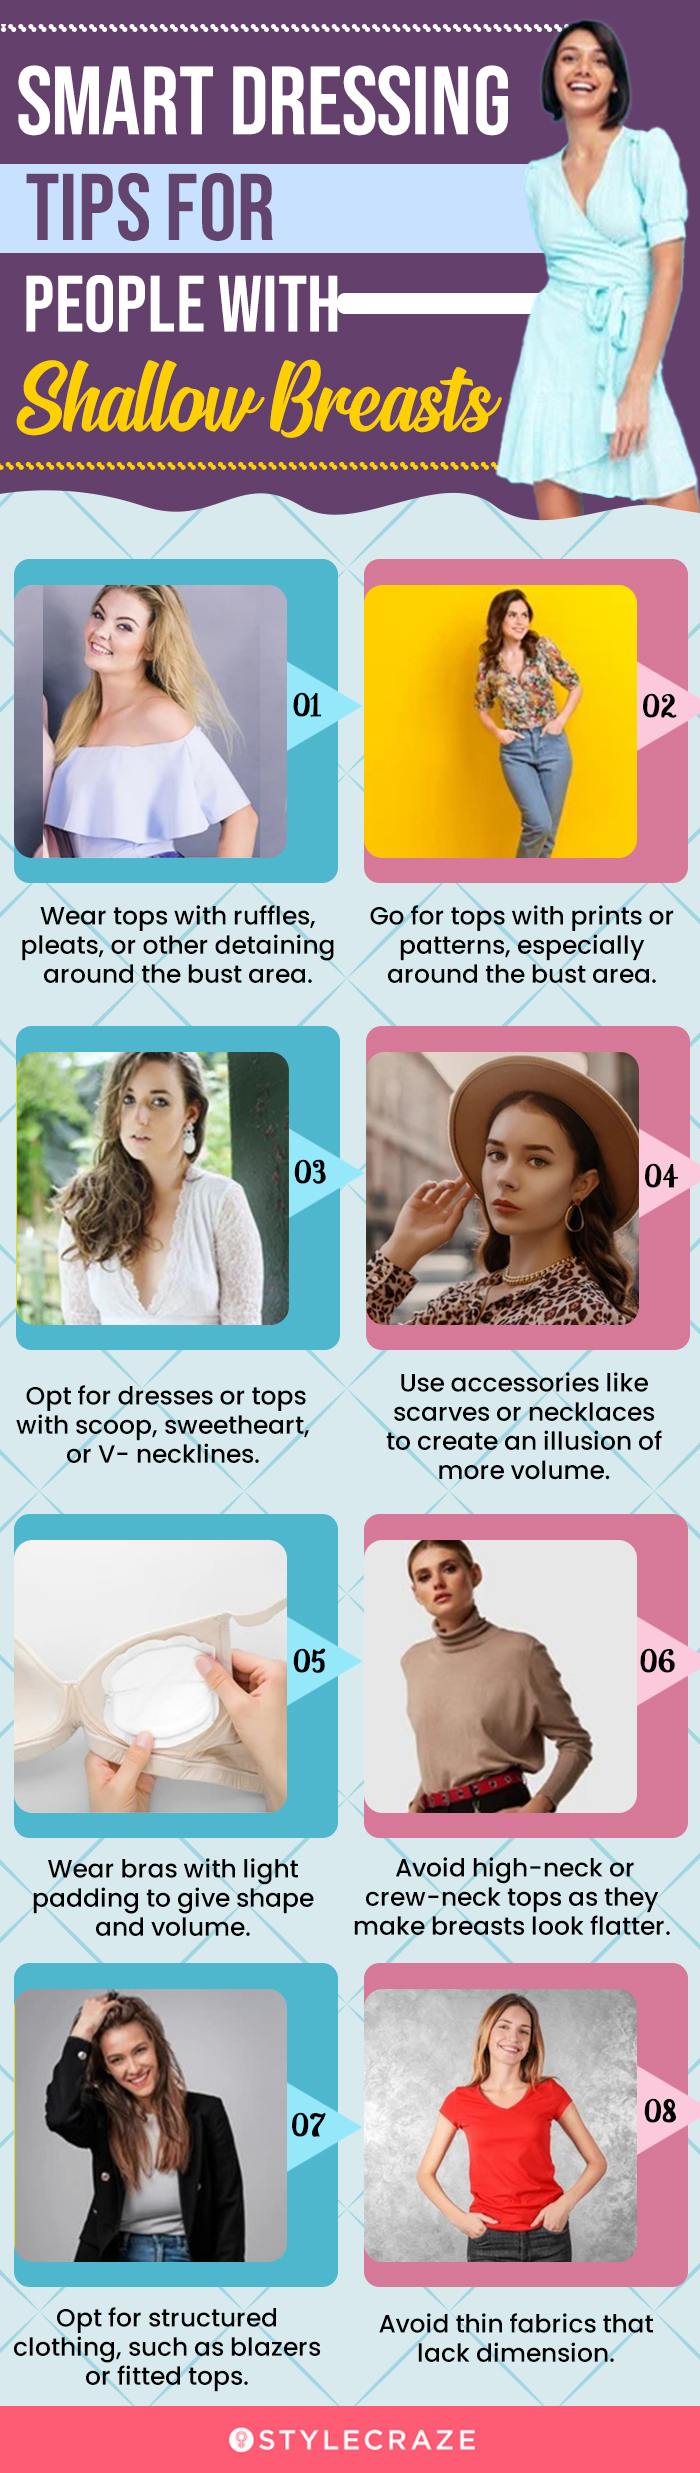 Smart Dressing Tips For People With Shallow Breasts (infographic)